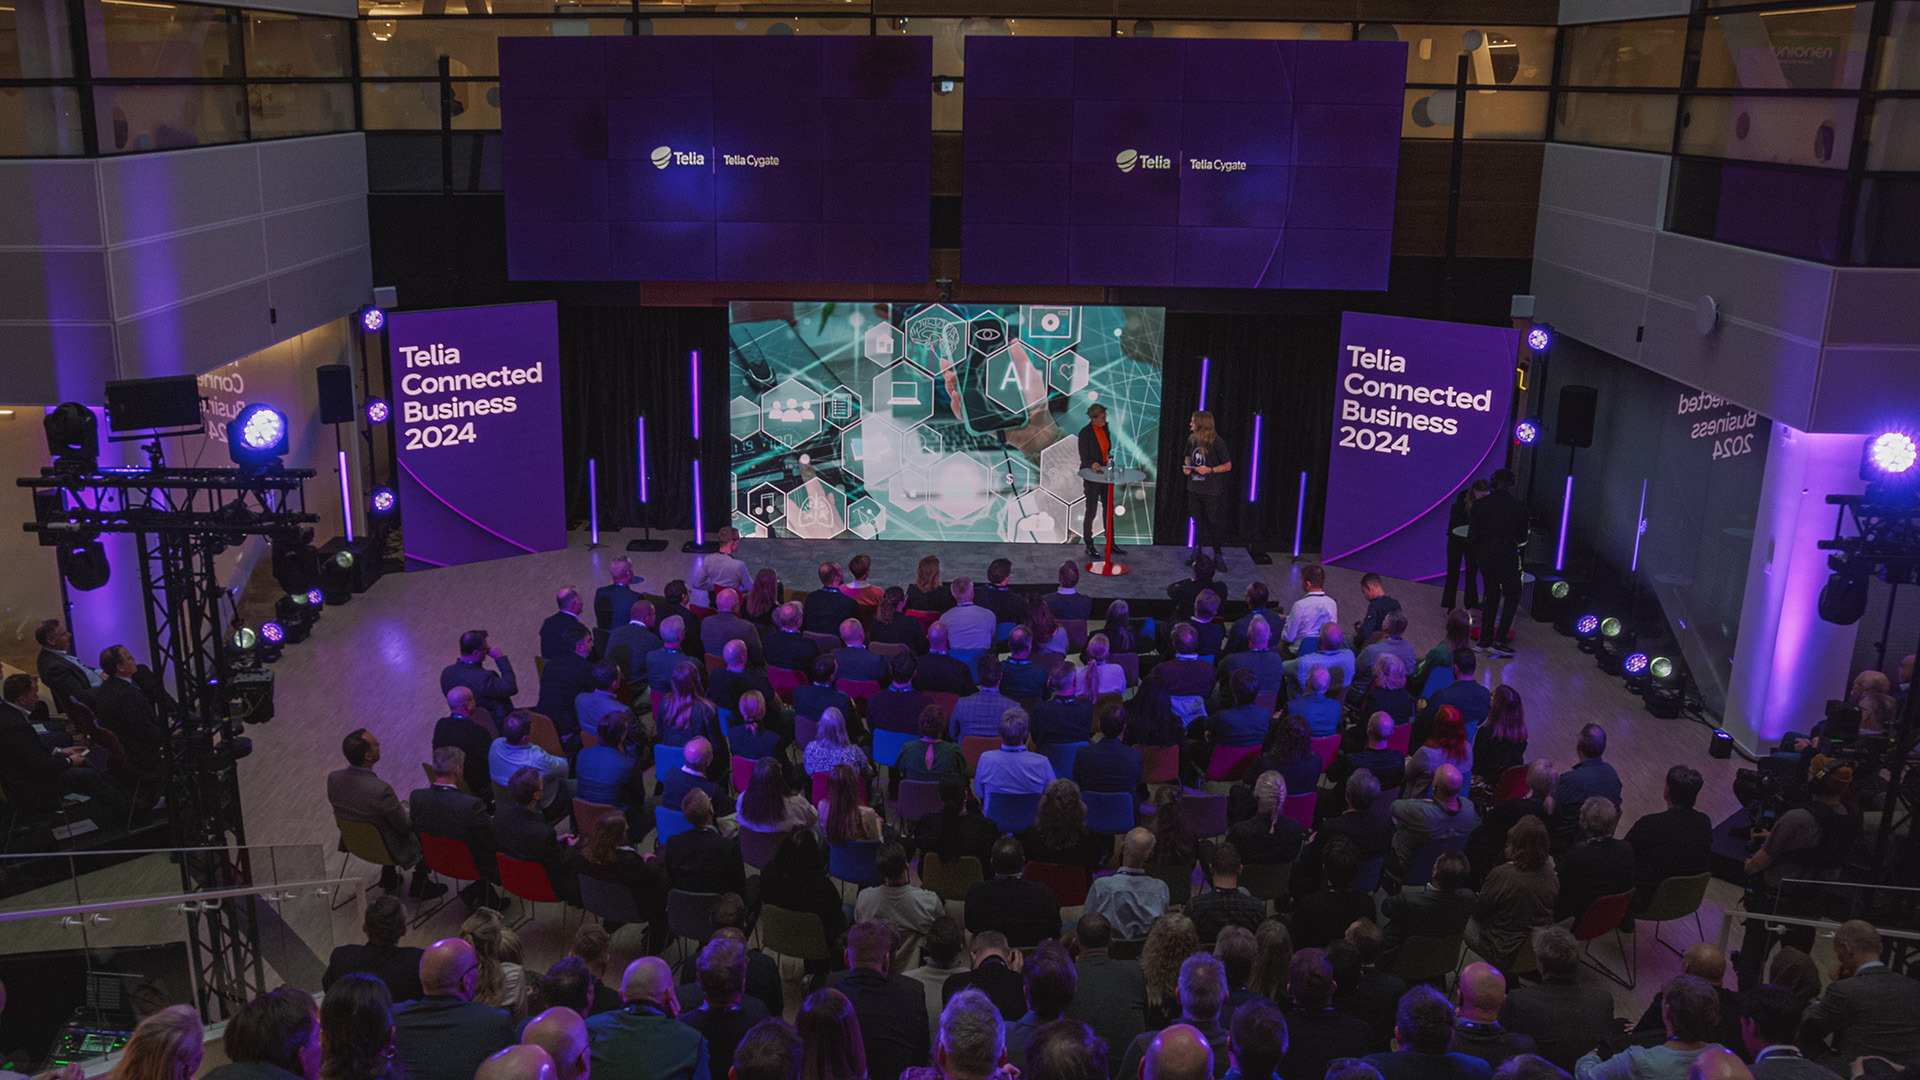 Telia connect to business 2024